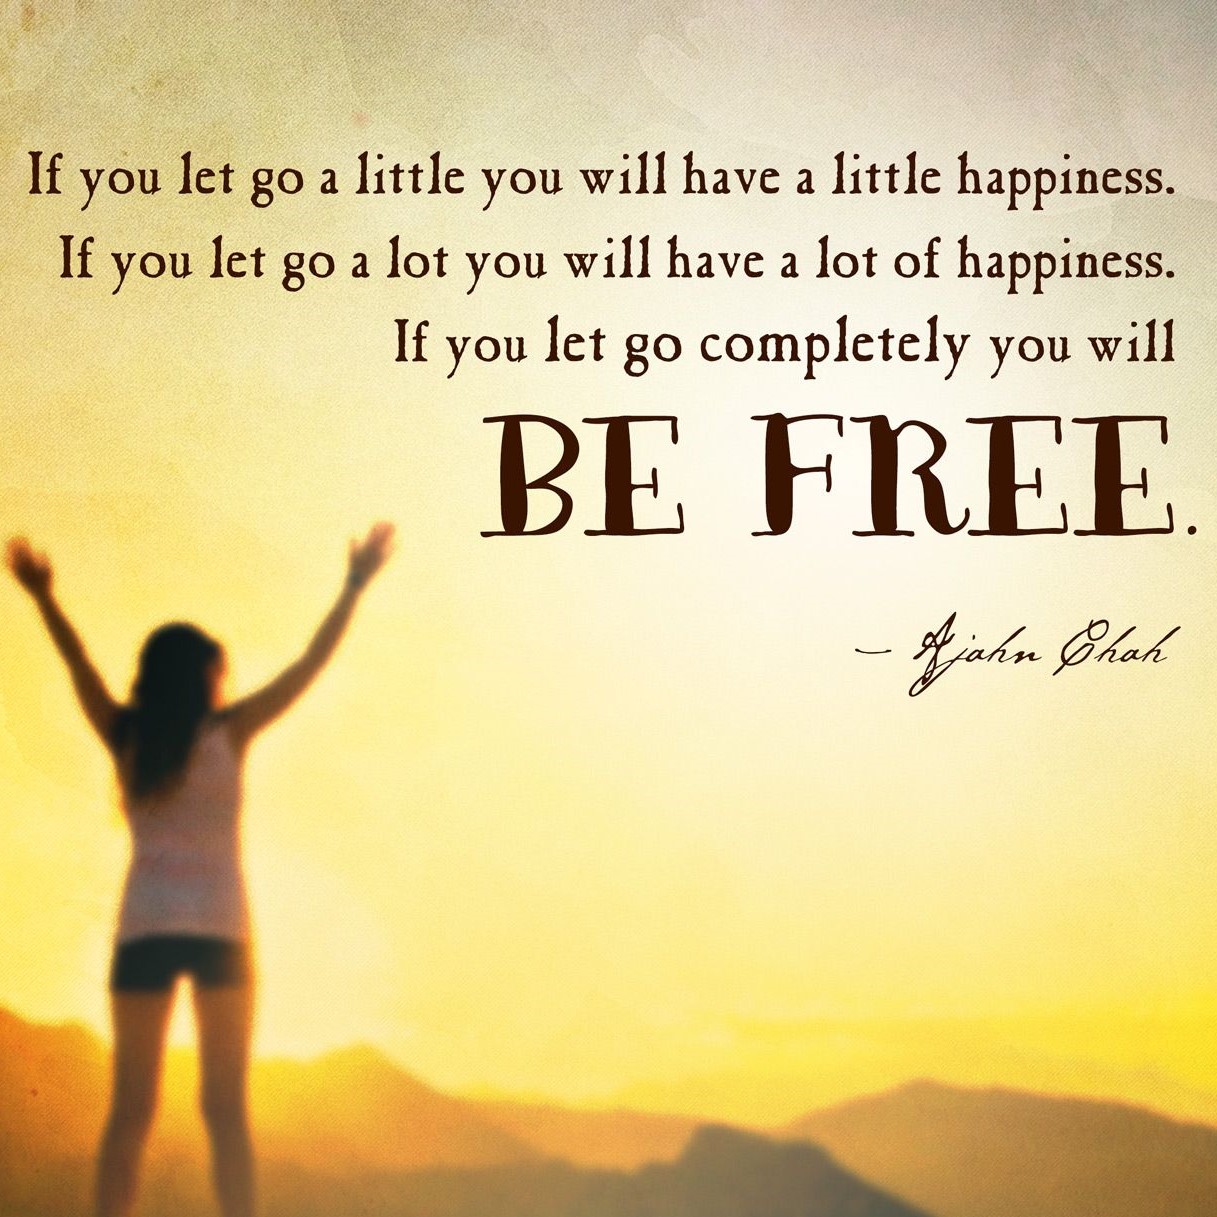 Let Go and Create Happiness